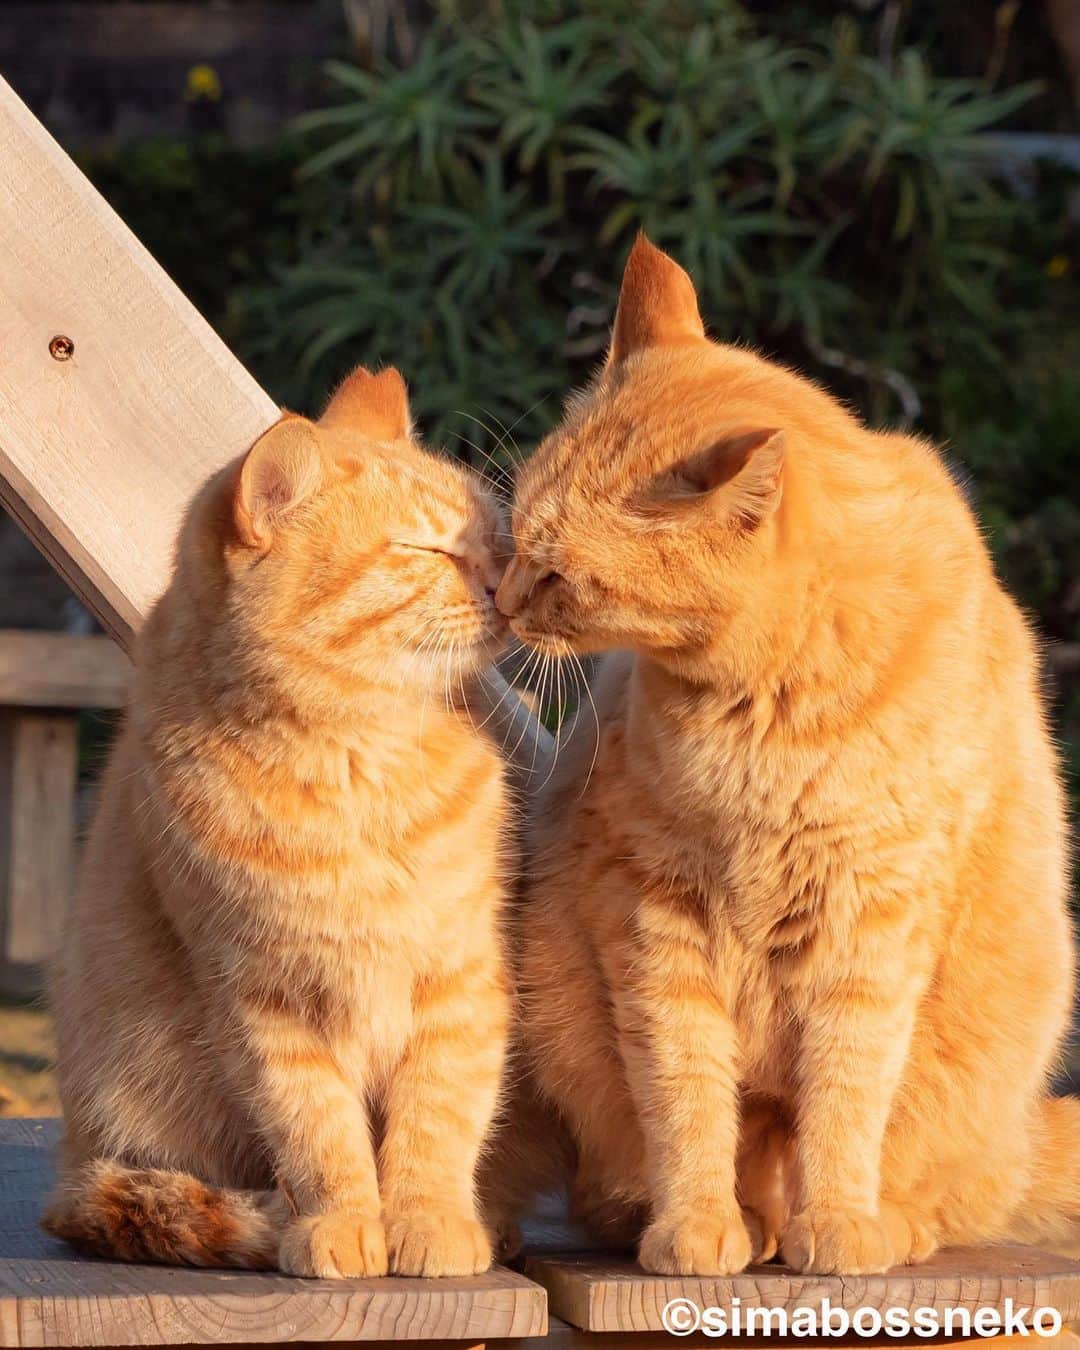 simabossnekoのインスタグラム：「・ なかよしkiss😽😸💓 Morning kiss✨  5枚目の投稿は動画です。 The 5th post is video. Swipeしてね←←←🐾  ・ 〜お知らせ〜 只今、人気の写真を厳選したクリアファイルを5種類、simabossneko's shopにて販売中です。  お得なセットも❣️ さち3枚セットに、さち3枚＋島猫2枚の5枚セットも販売中✨  ◎販売はminneと、メルカリShops内「simabossneko's shop」にて  各ショップへは、@simabossneko または @p_nyanco22 のプロフィールリンクからご覧いただけます。  🔍メルカリは、アプリ立ち上げ後「simabossneko's shop」で検索してみてください。  👉ストーリーハイライトにも、ショップへのリンク(minne)があります。そちらも是非ご覧ください。  ※8/29現在、ご購入いただきました作品の発送は、9/1以降を予定しております。何卒ご了承くださいませ。 ・ ・ 〜Notice〜 Island cats A4 file folders are available!✨  The file folders are carefully selected from 5 popular photos.  We also sell a great set ❣️ Sachi 3-piece set, 5-piece set of 3 Sachi + 2 island cats are also available✨  The  A4 size file folders are sold at minne "simabossneko's shop“  ●Shop URL https://minne.com/＠simabossneko  🇺🇸🇰🇷🇹🇼 It is possible to purchase and ship from Taiwan, Hong Kong, the USA, Korea, etc.  🇫🇷🇬🇧🇩🇪 It is now possible to ship and purchase the works to Europe!! France, UK, Germany etc.  ※ Shipping fee will be charged separately.  You can reach the shop from the profile link of @simabossneko or @p_nyanco22   And, Story highlights also have a link to the shop. Please take a look there too. ・ ・ #クリアファイル #しまねこ #島猫 #ねこ #にゃんすたぐらむ #猫写真 #cats_of_world #catloversclub #pleasantcats #catstagram #meowed #ig_japan #lumixg9」